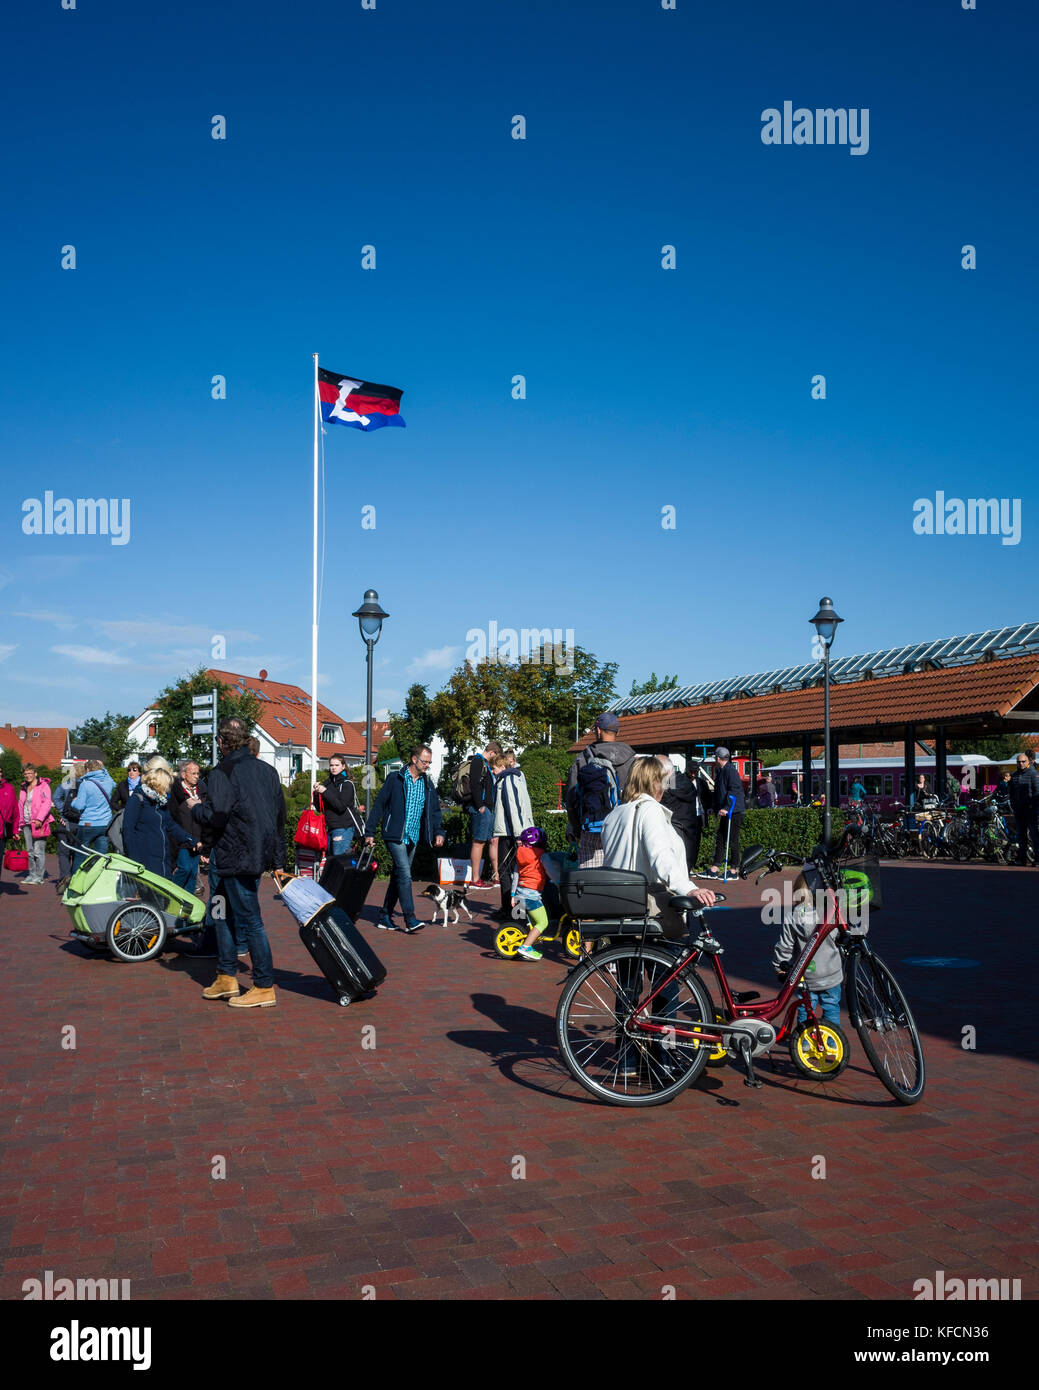 Inselbahnhof, Langeoog.  Deutschland.  Germany.  A view of holiday makers on the platform of the island's railway station.  The Langeoog flag flying high against the blue sky on a bright sunny day. Stock Photo